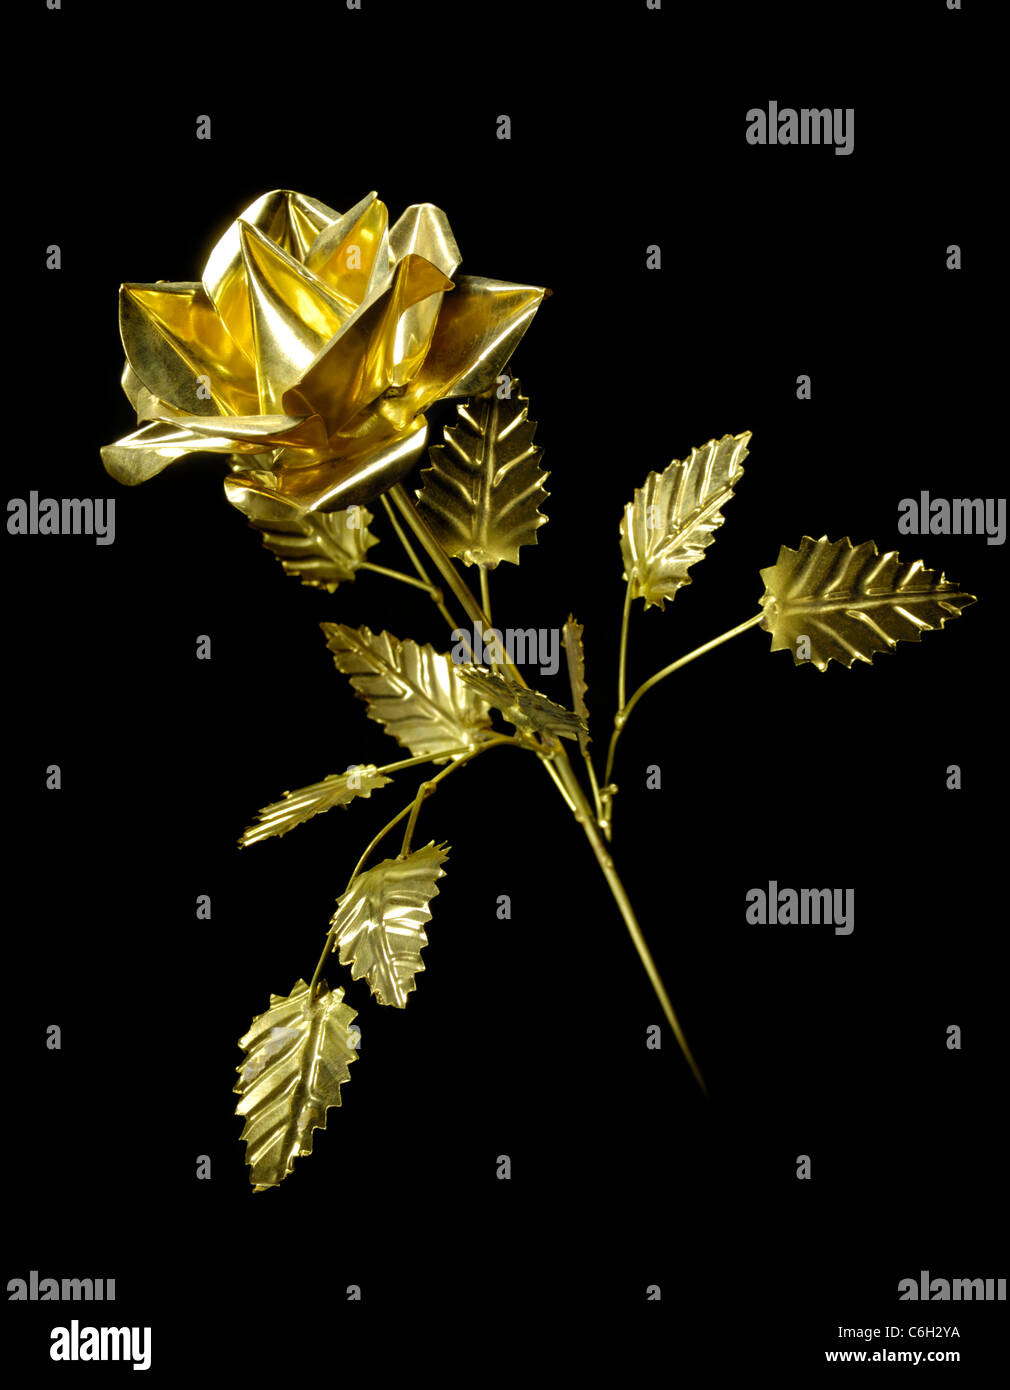 Shiny metal rose Flower made from brass Isolated on black background Stock Photo